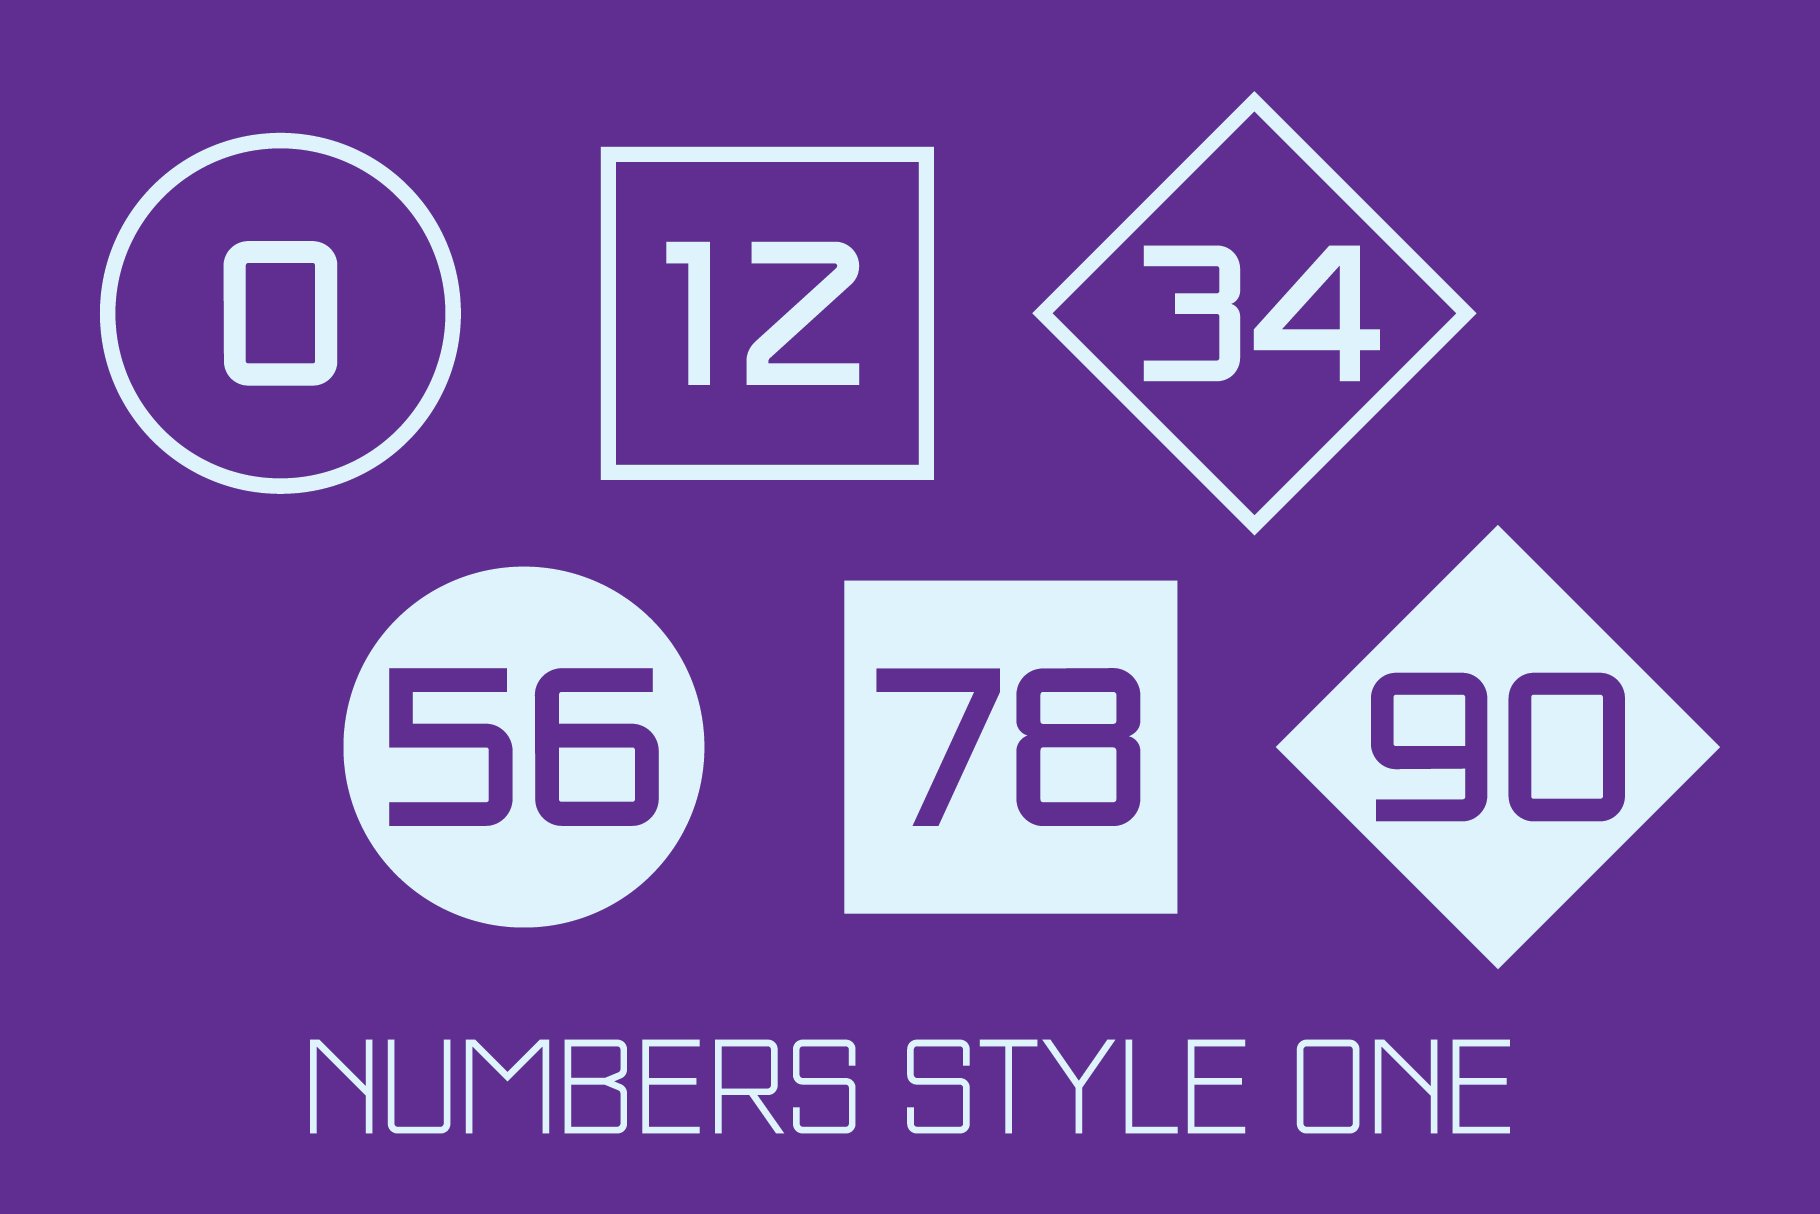 Numbers Style One Fonts cover image.